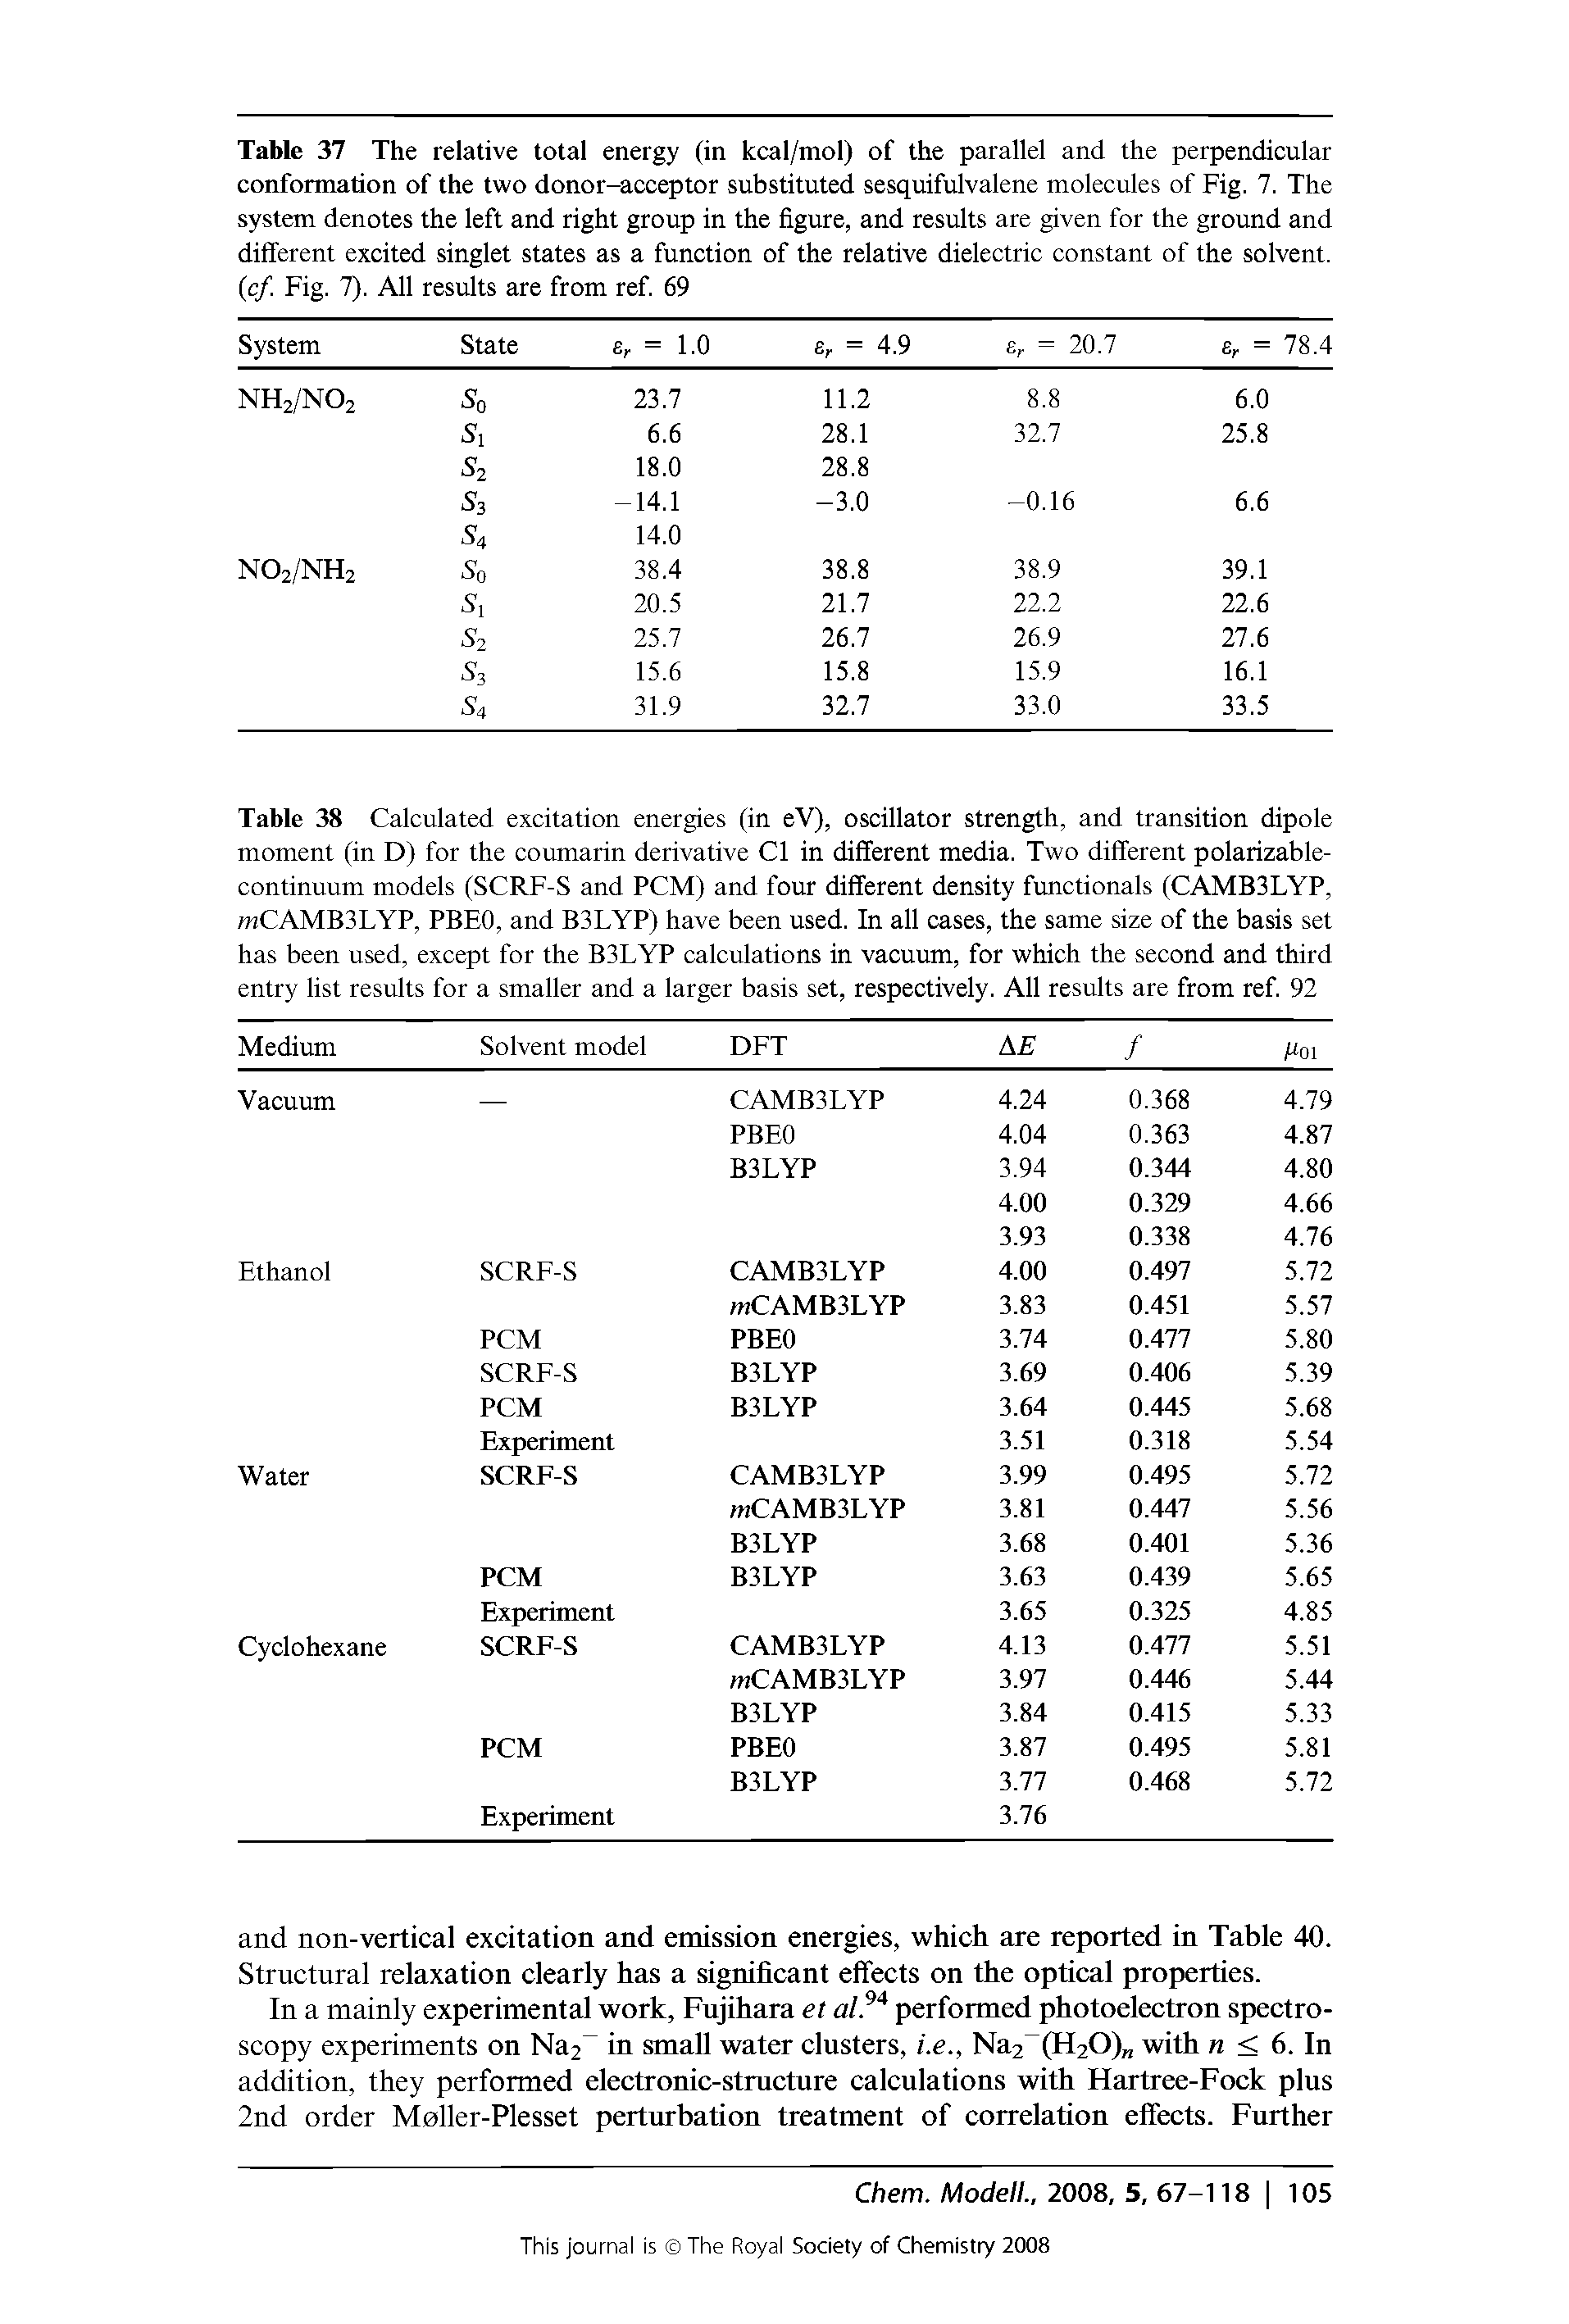 Table 38 Calculated excitation energies (in eV), oscillator strength, and transition dipole moment (in D) for the coumarin derivative Cl in different media. Two different polarizable-continuum models (SCRF-S and PCM) and four different density functionals (CAMB3LYP, mCAMB3LYP, PBEO, and B3LYP) have been used. In all cases, the same size of the basis set has been used, except for the B3LYP calculations in vacuum, for which the second and third entry list results for a smaller and a larger basis set, respectively. All results are from ref. 92 ...